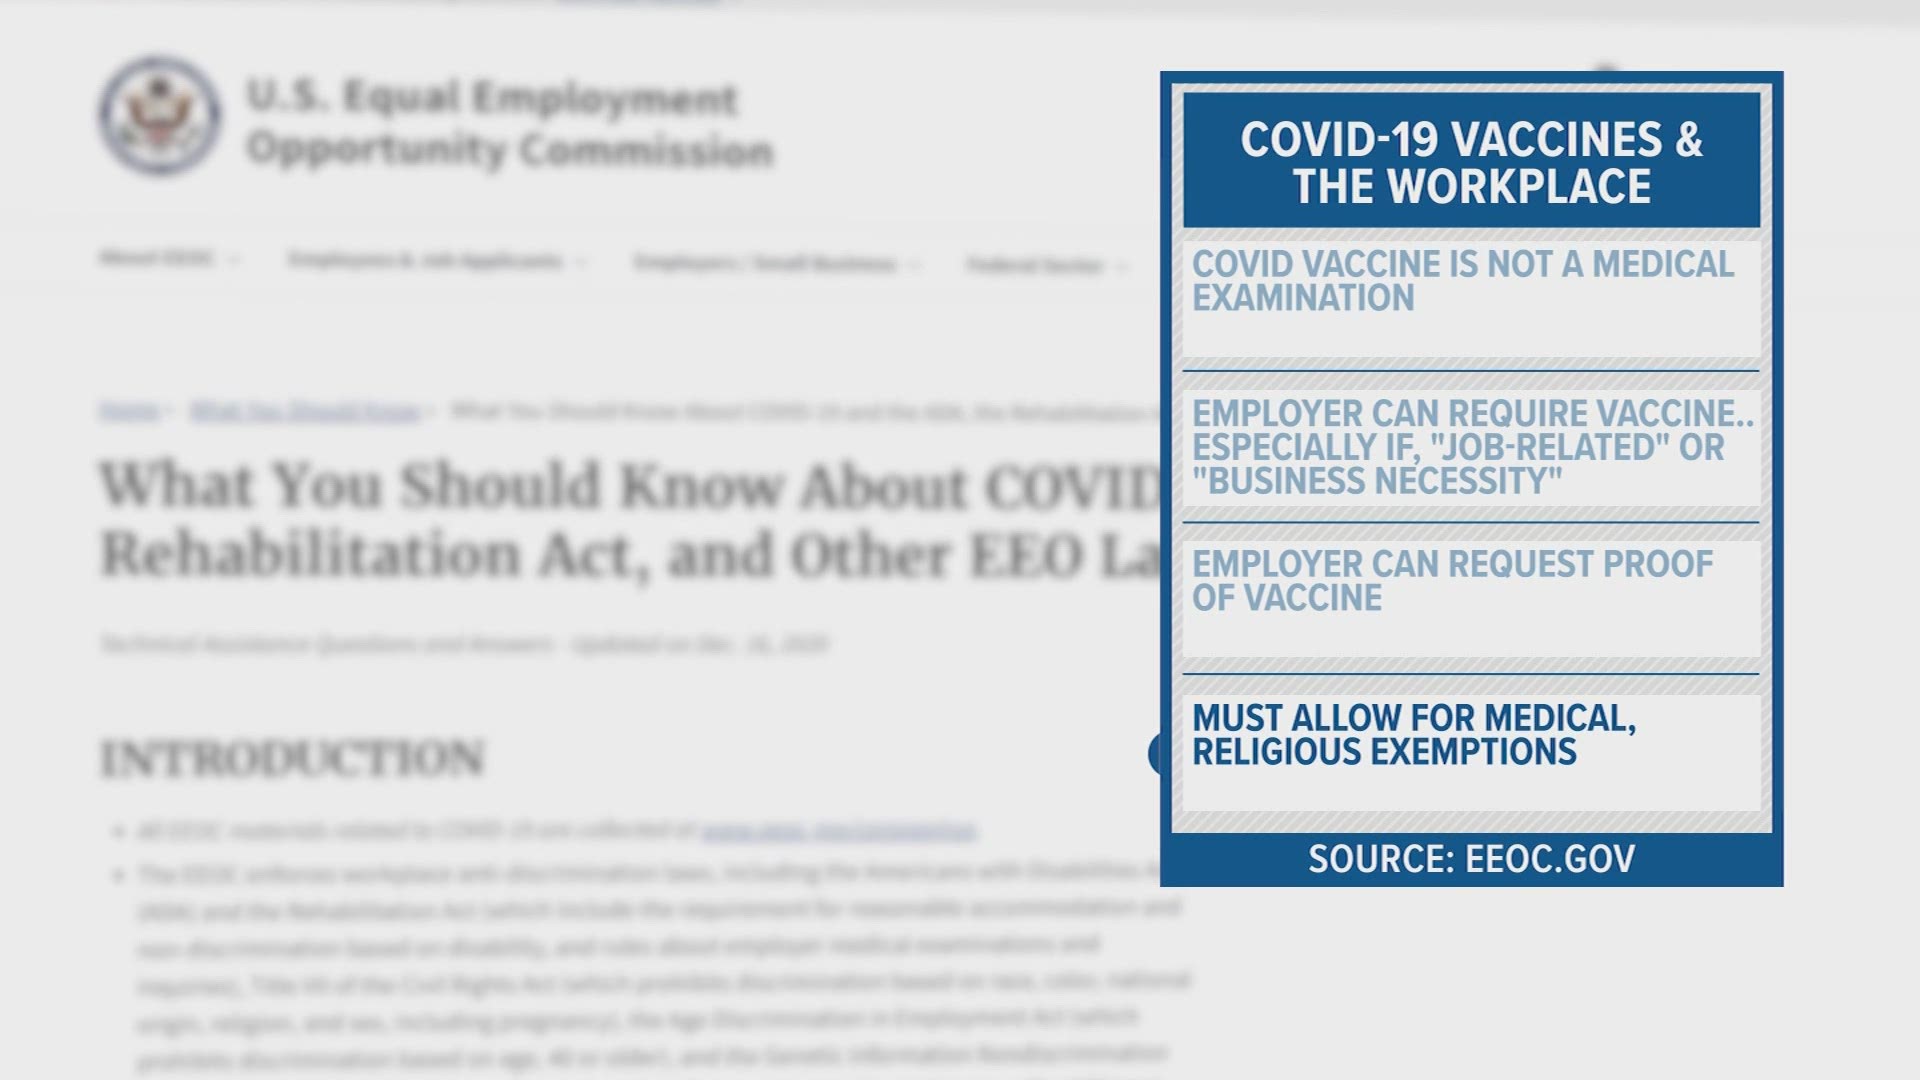 During its first virtual hearing about COVID-19 and the workplace, the EEOC heard concerns about how employers can require the vaccine.